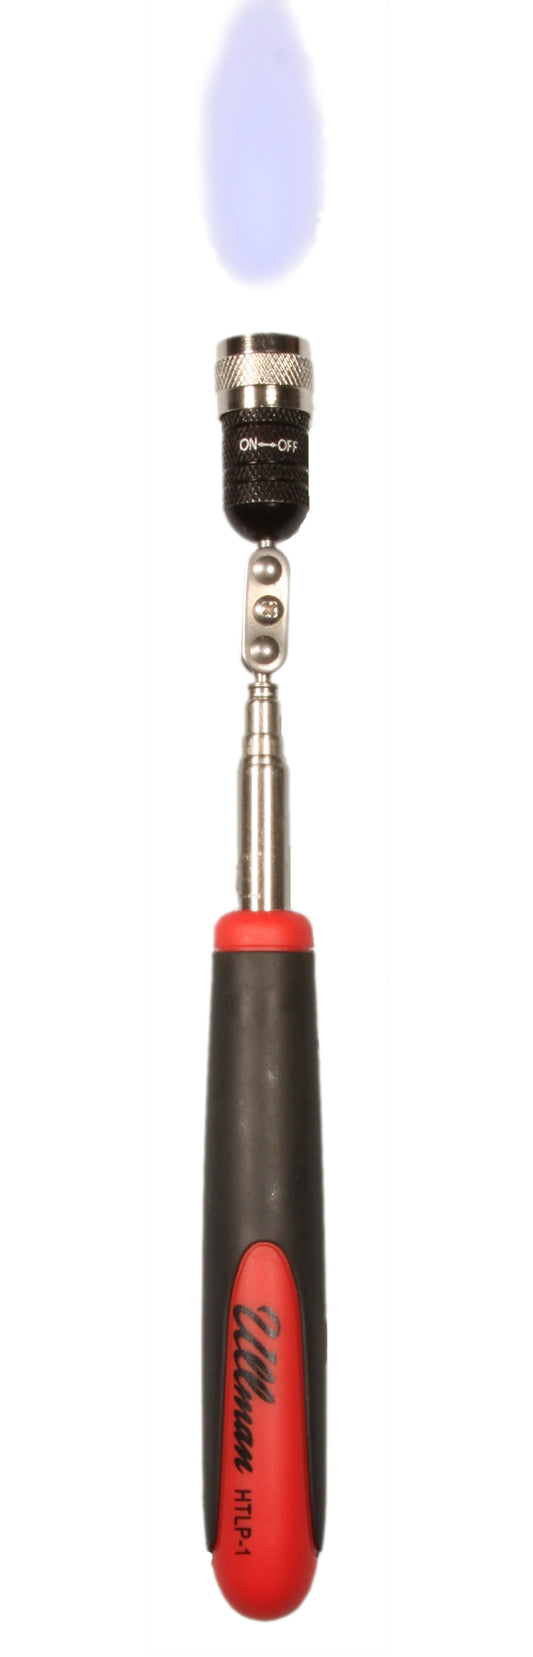 ULLMAN HTLP-1 Adjustable Telescopic Magnetic Pick-Up Tool with POWERCAP® and LED Light, HTLP1